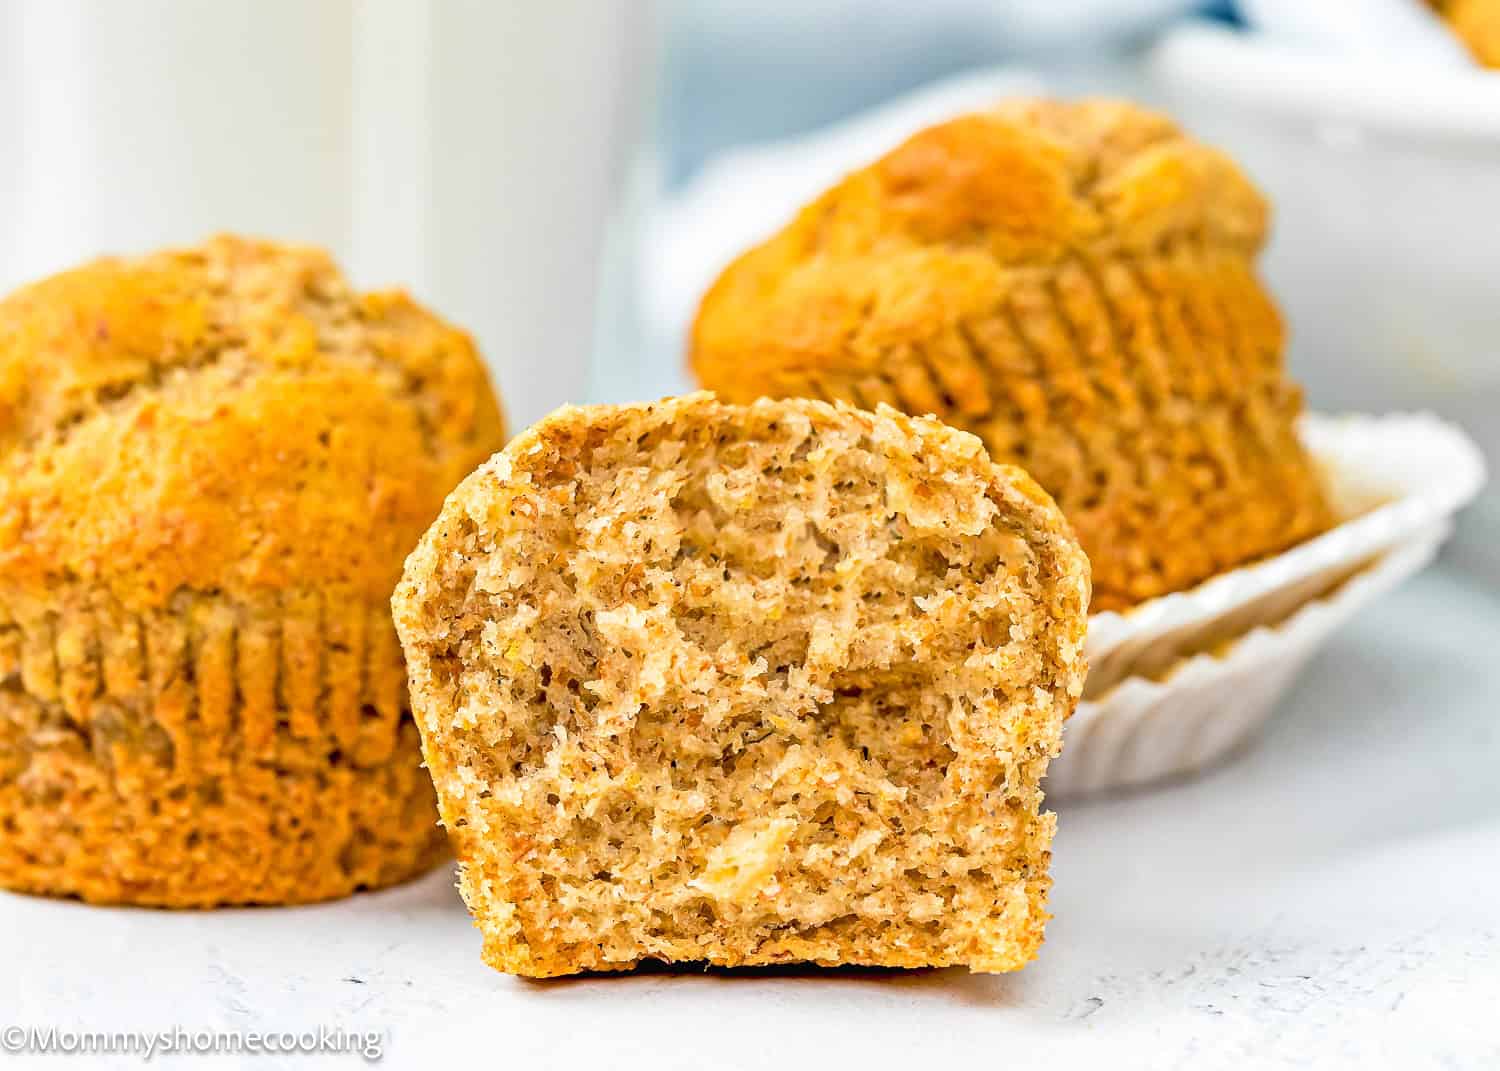 a Healthy Egg-Free Mini Banana Muffin over a white surface cut in half showing its perfect texture.